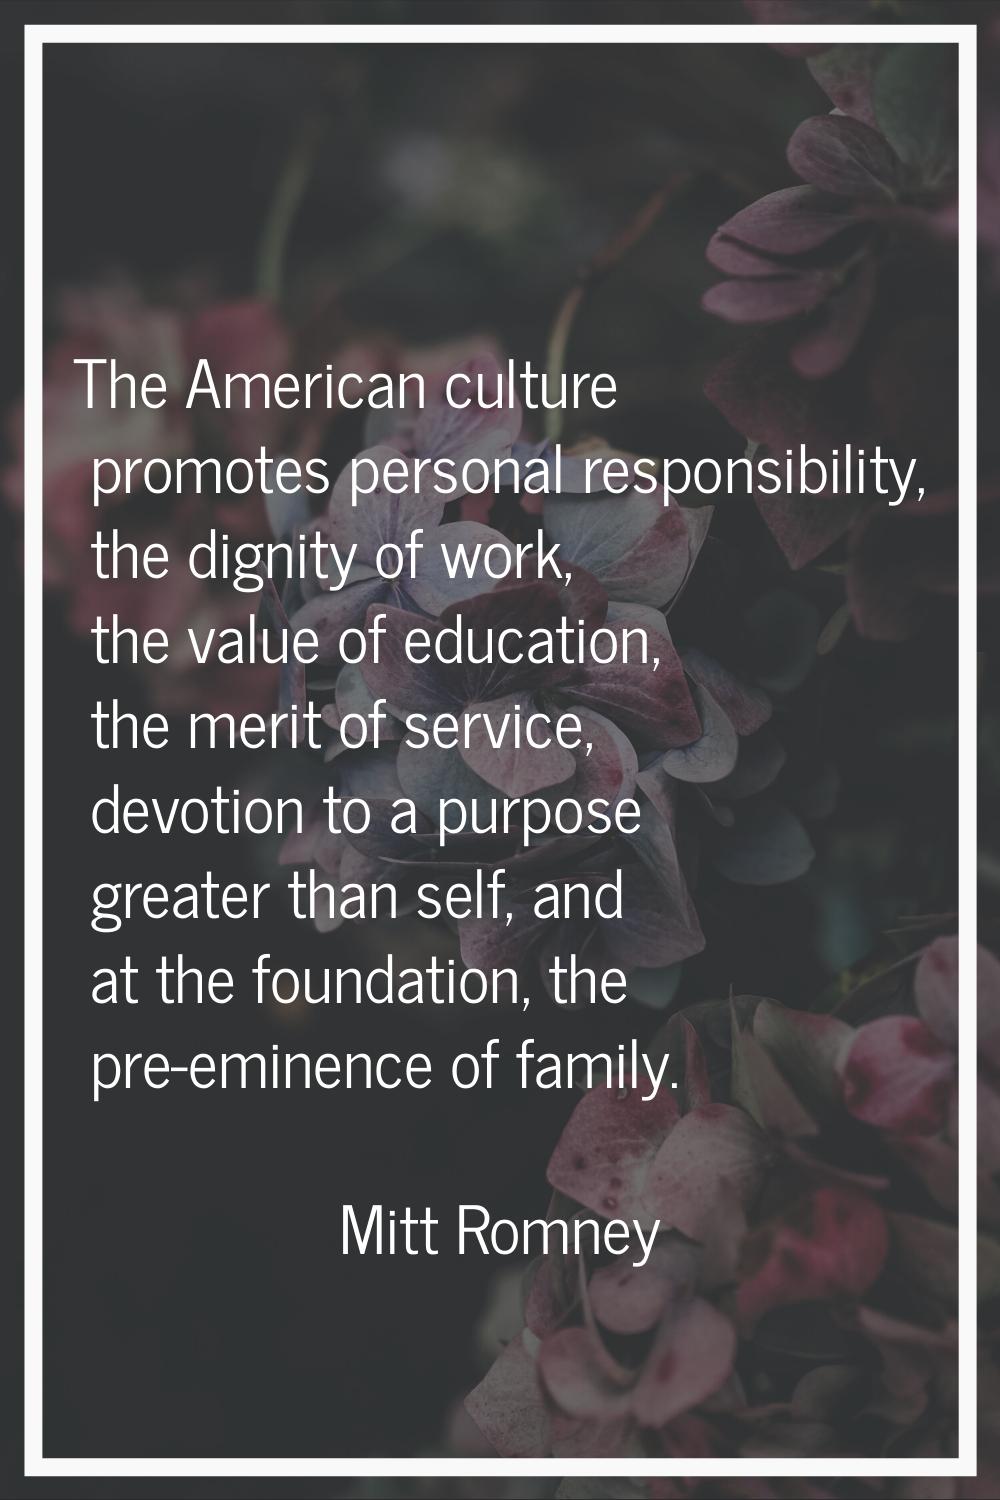 The American culture promotes personal responsibility, the dignity of work, the value of education,